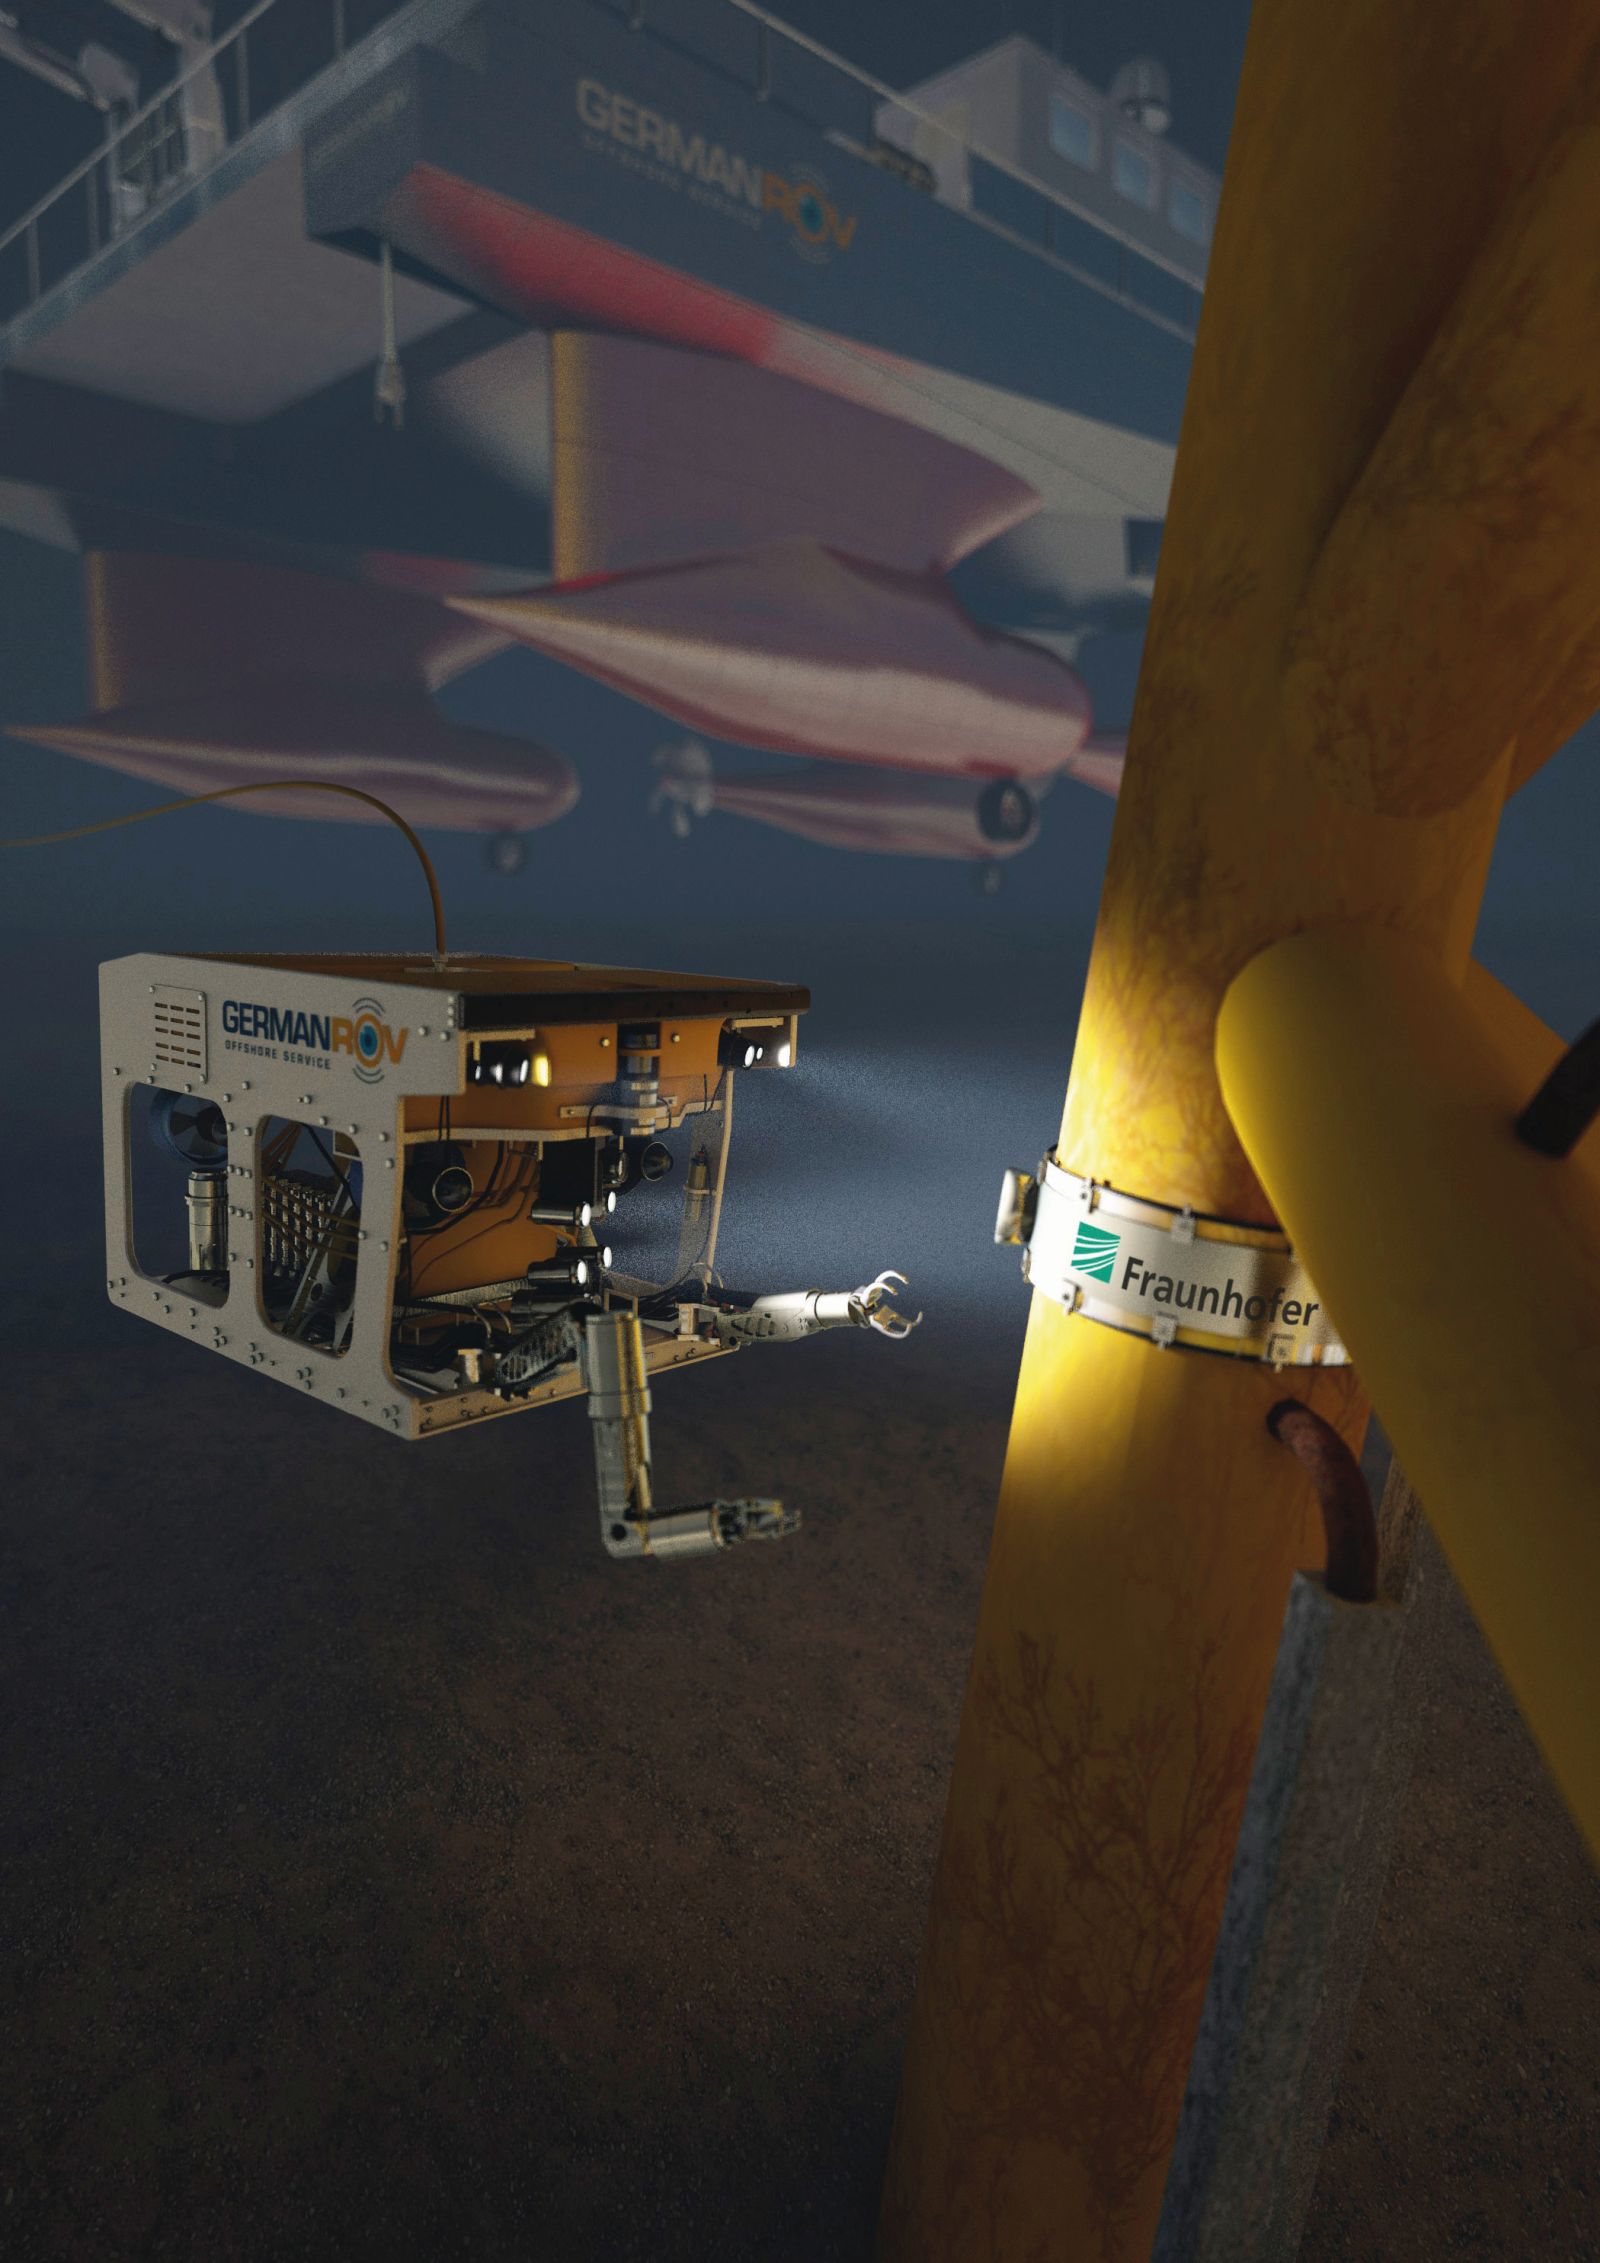 Virtual docking maneuver of an underwater vehicle to an offshore wind turbine.